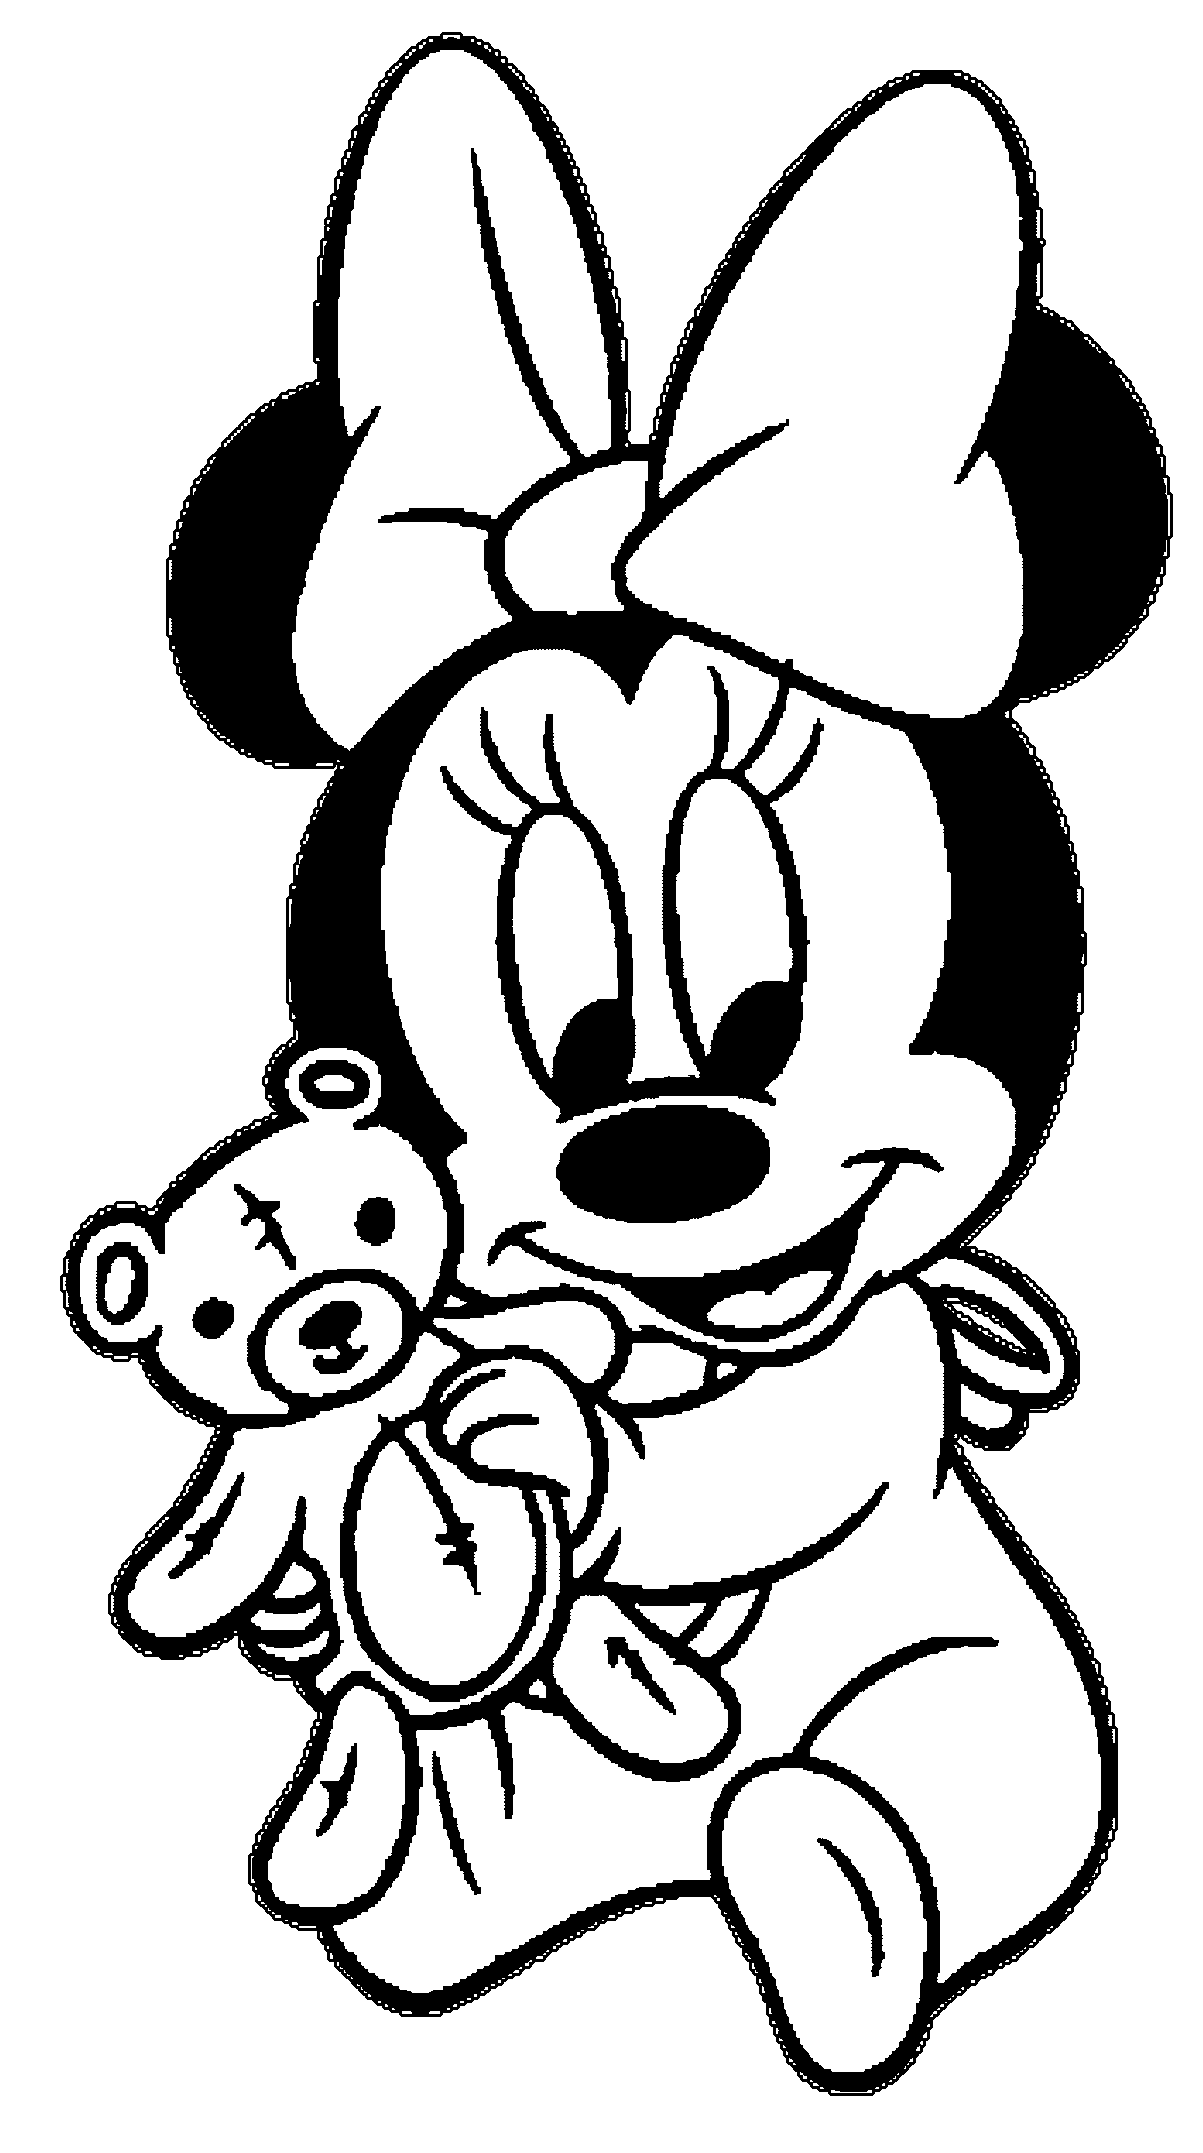 Baby Minnie Teddy Bear Coloring Page | Wecoloringpage ...